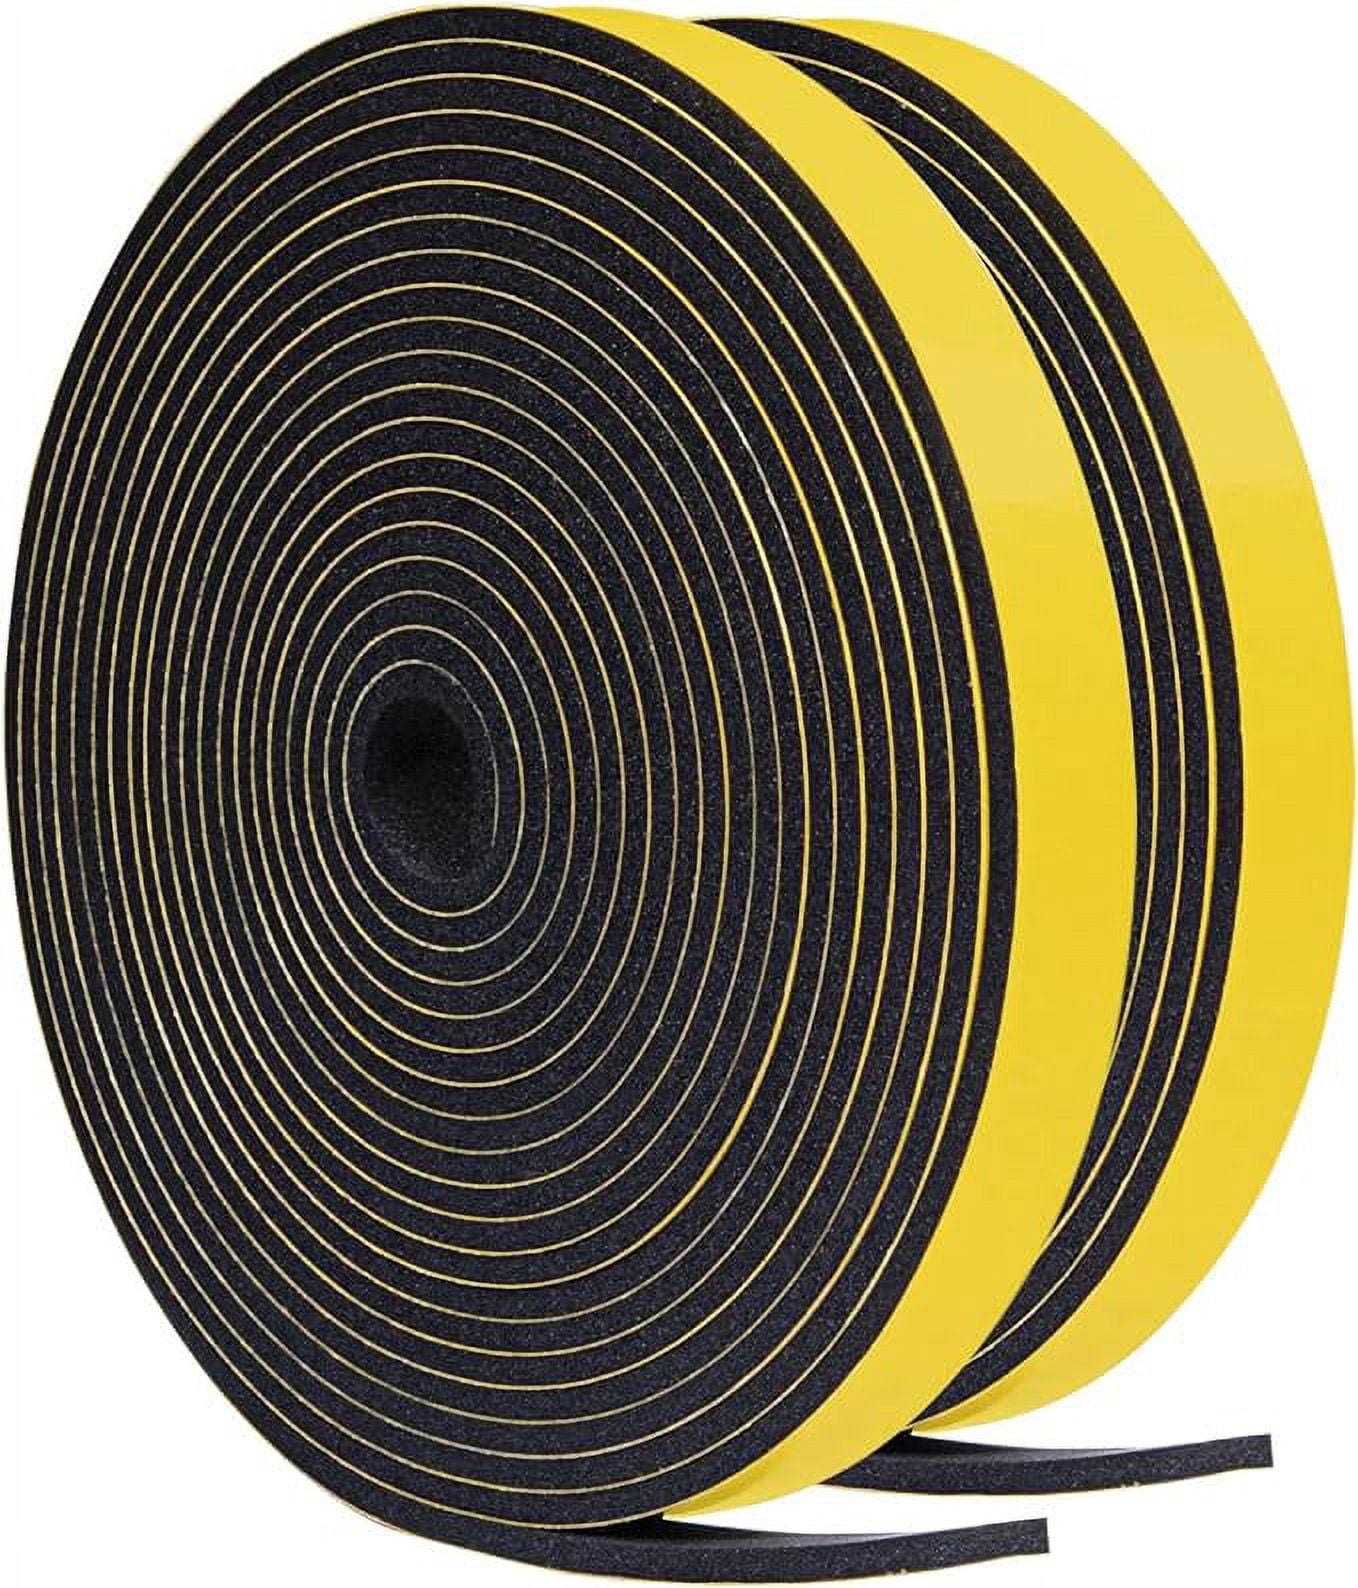 Yotache Foam Strips with Adhesive 2 Rolls 1 WX 3/8 T, (New Adhesive  Craft) Black Foam Insulation Weather Stripping Door Seal Tape, 13 Ft Length  (2 X